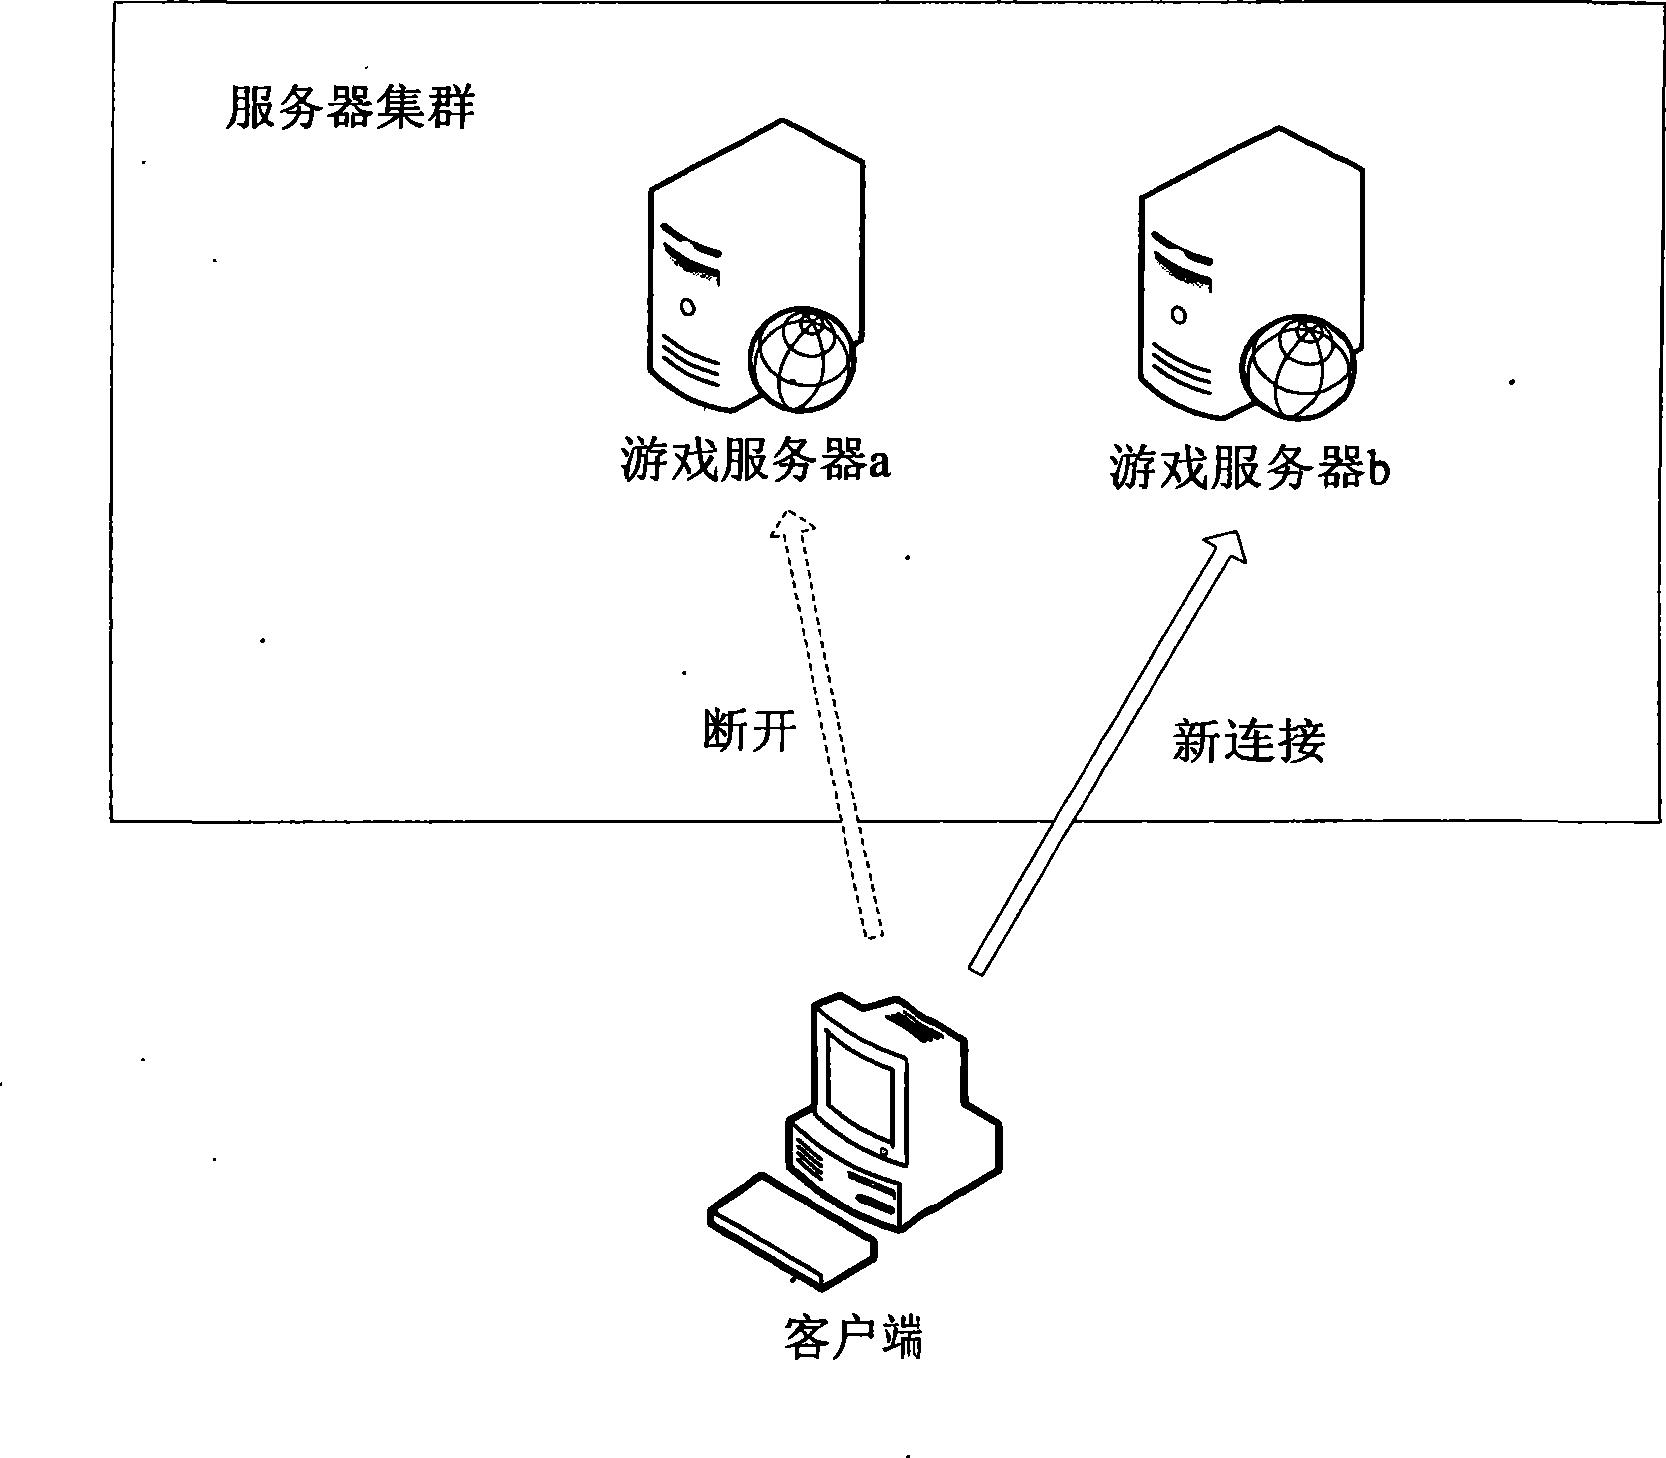 Authentication method for network game client and server cluster